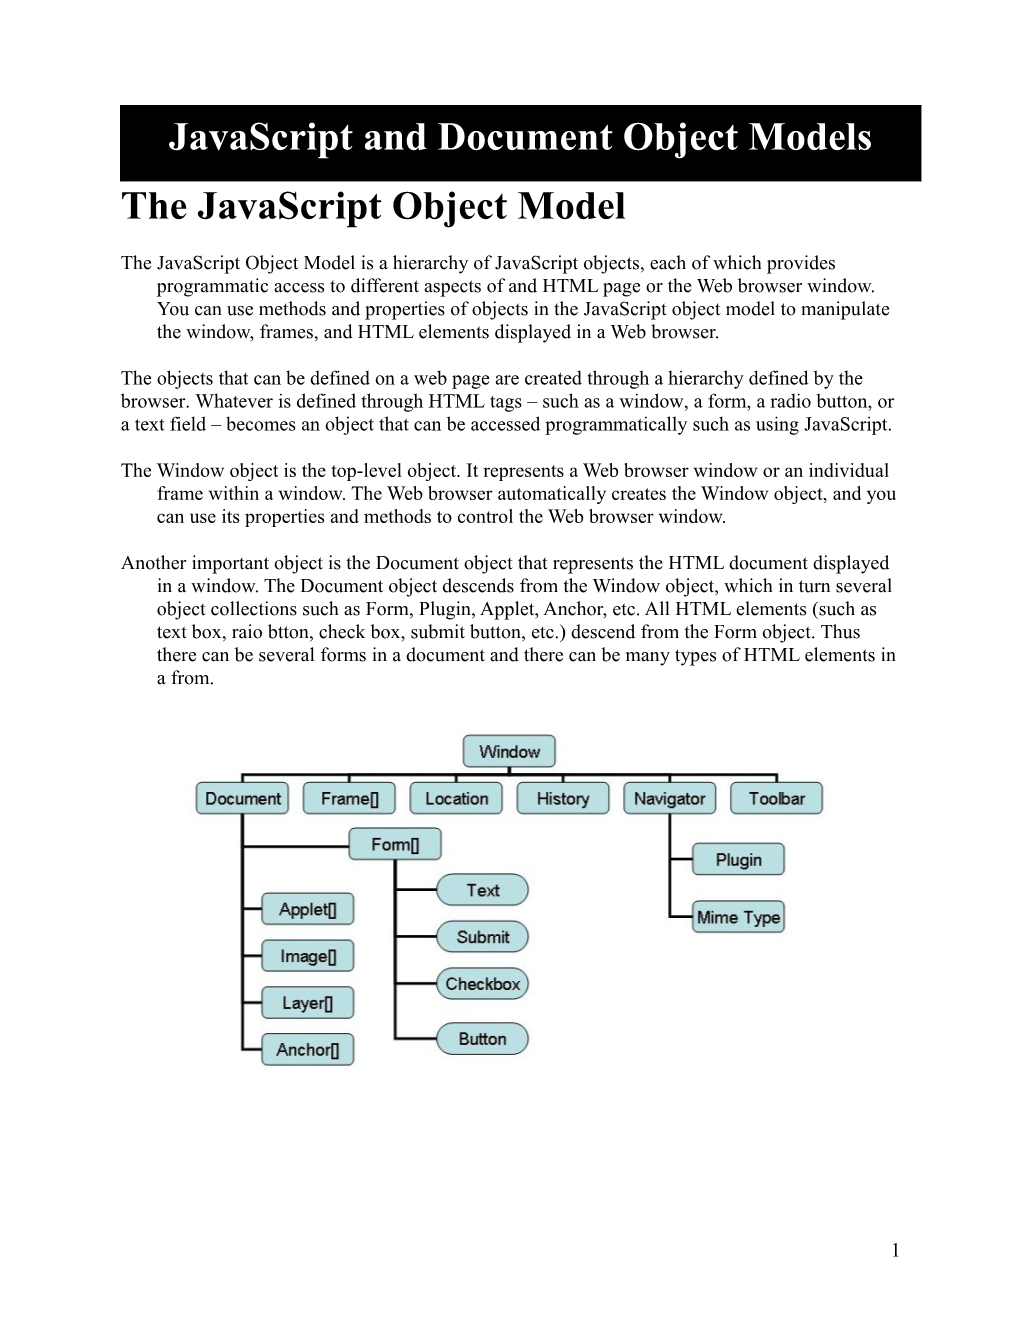 The HTML Document Object Model